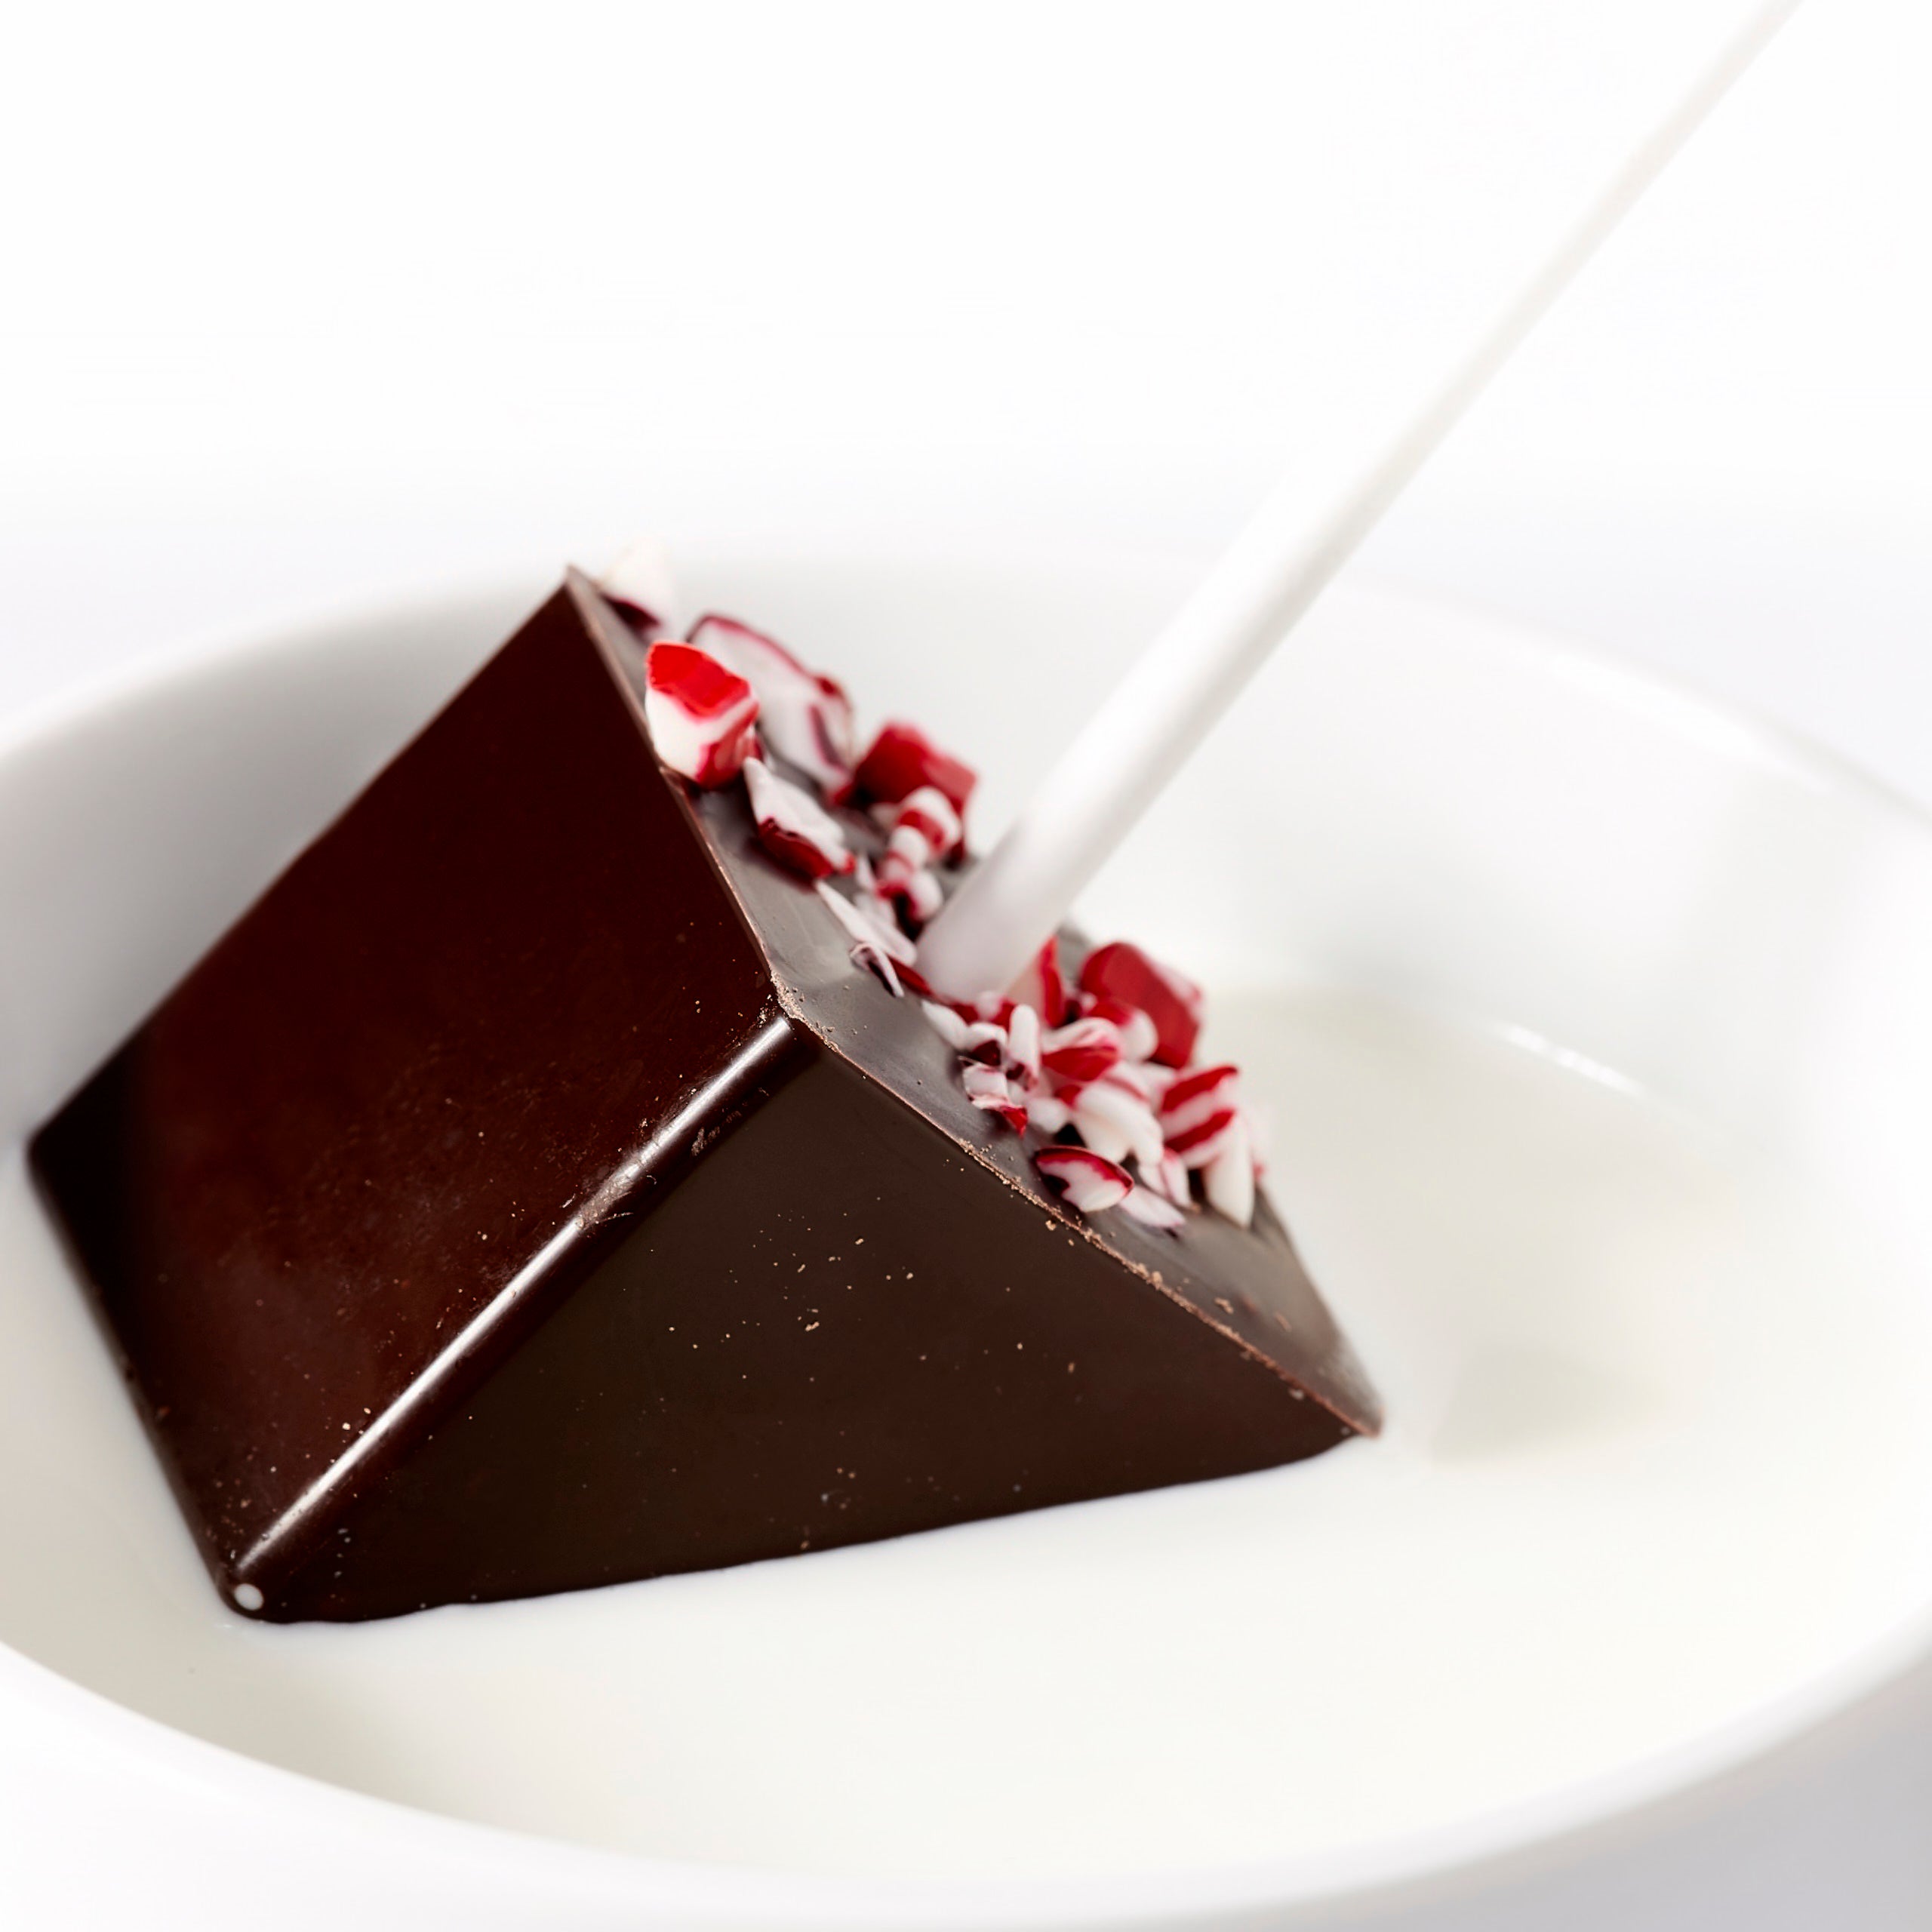 Hot Chocolate Stirrers: Dark Chocolate + Peppermint Wooden Table Baking Co.